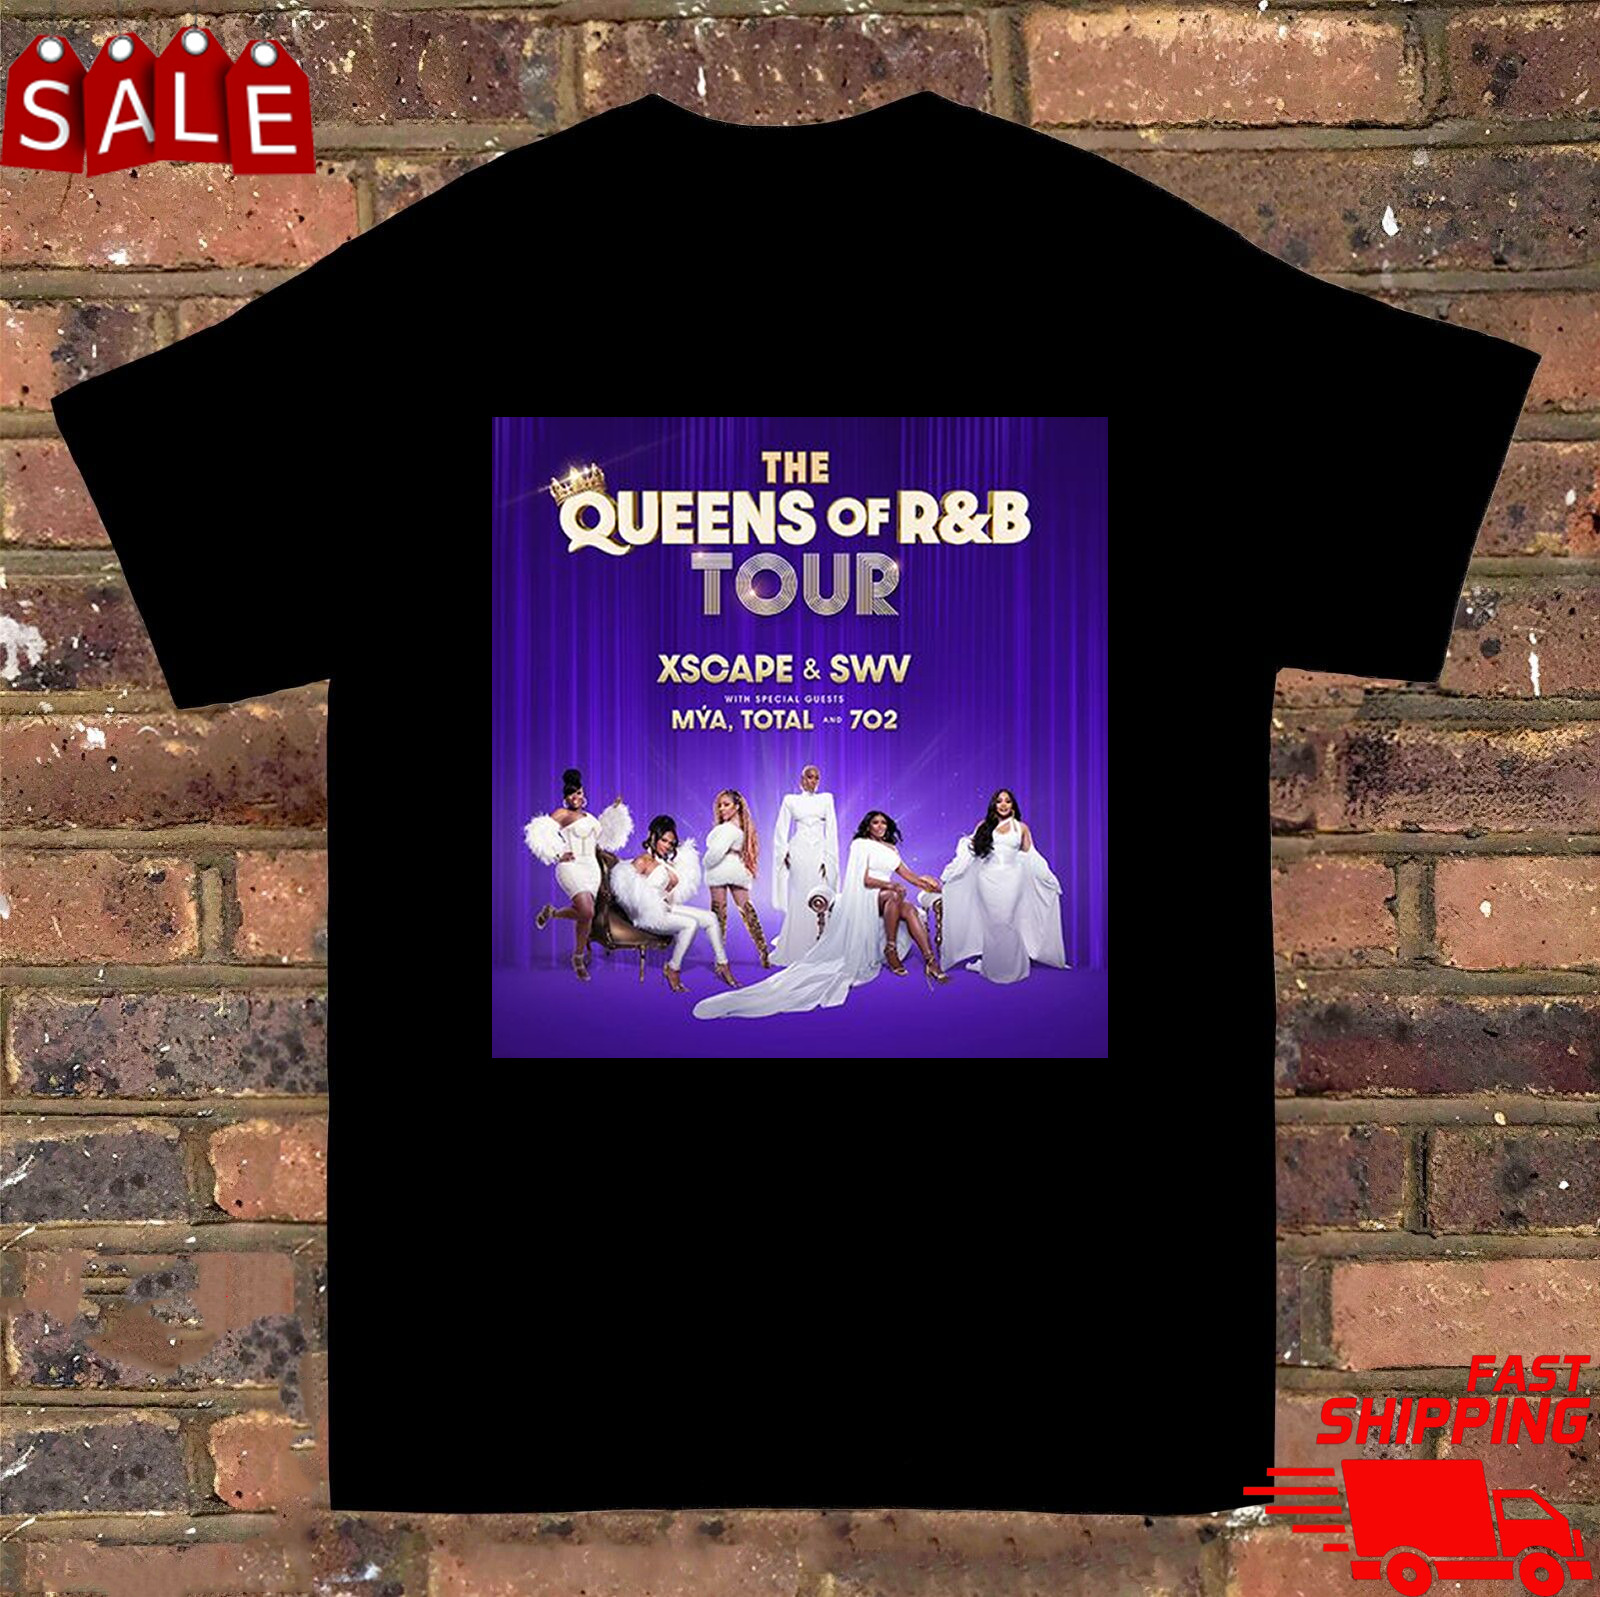 The Queens of R&B Xscape and SWV On Tour T Shirt Full Size S-5XL SO105